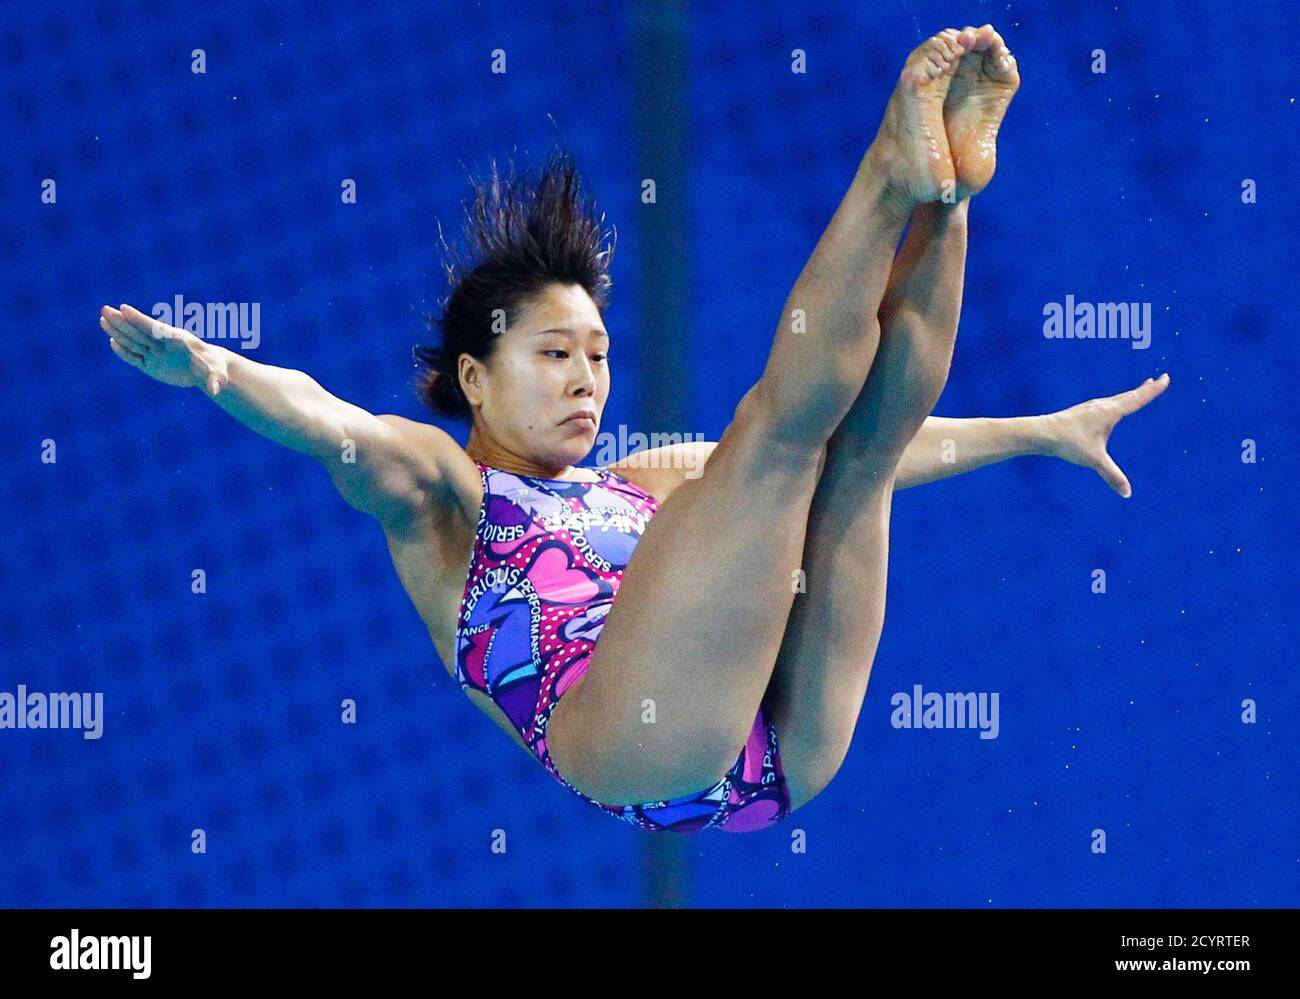 Mai Nakagawa of Japan competes in the women's 3m springboard diving final at the 16th Asian Games in Guangzhou, Guangdong province, November 26, 2010. REUTERS/Jason Lee (CHINA  - Tags: SPORT DIVING) Stock Photo